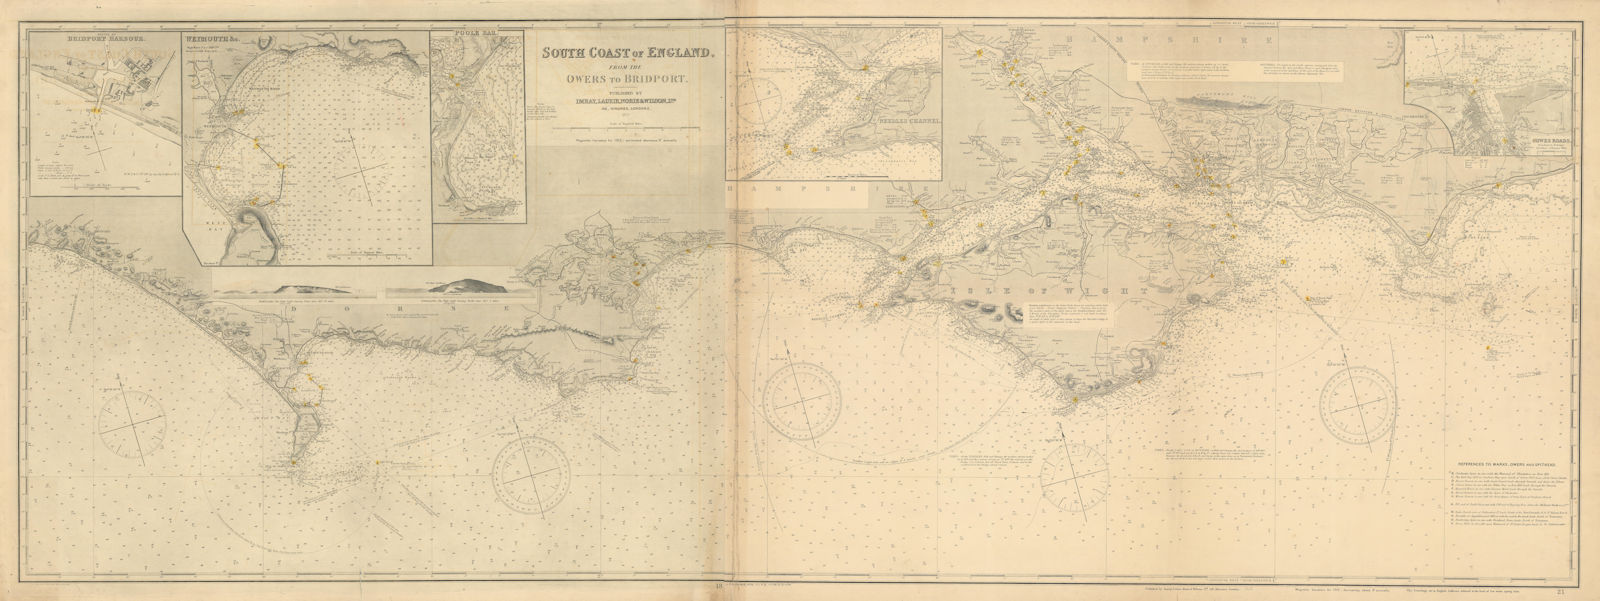 South Coast of England. 175x65cm. Imray Laurie Norie Wilson sea chart 1913 map